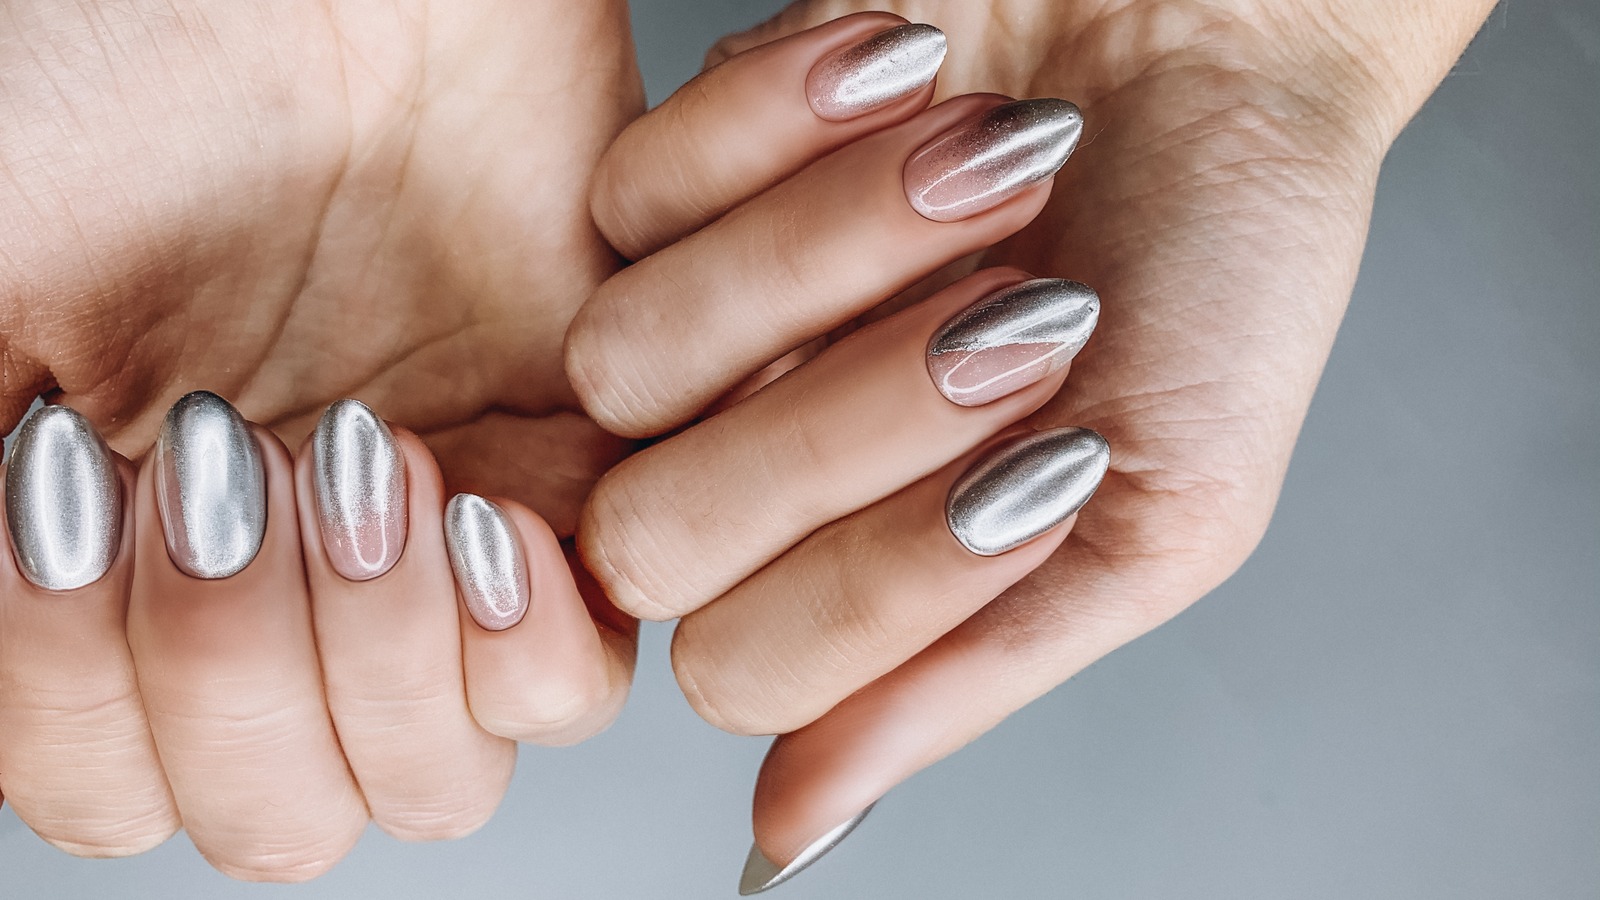 What Are The 5 Basic Nail Shapes - Everything You Need To Know - Tasiahub |  Types of nails shapes, Rounded acrylic nails, Basic nails